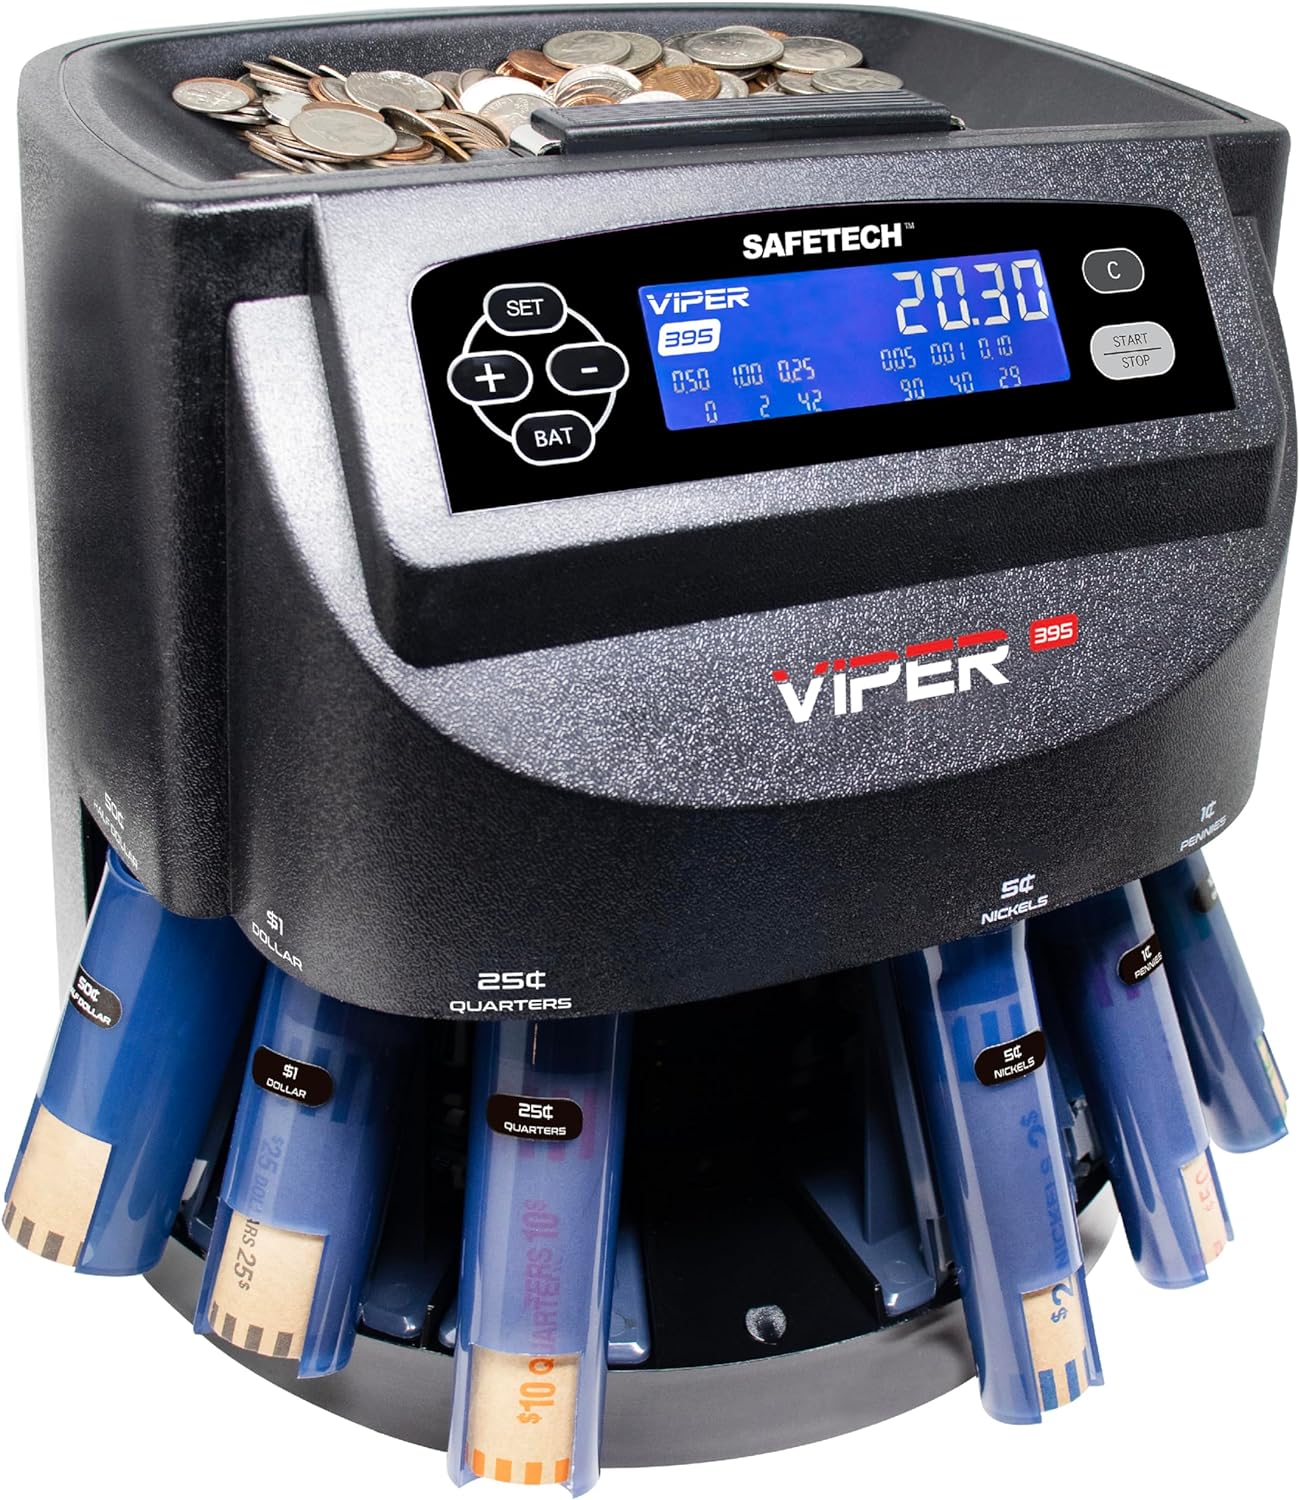 Safetech Viper V395 Coin Counter, Sorter, and Wrapper, Sorts All US Coins Including Half Dollars, Comes with 48 Preformed Wrappers, Dust Cover